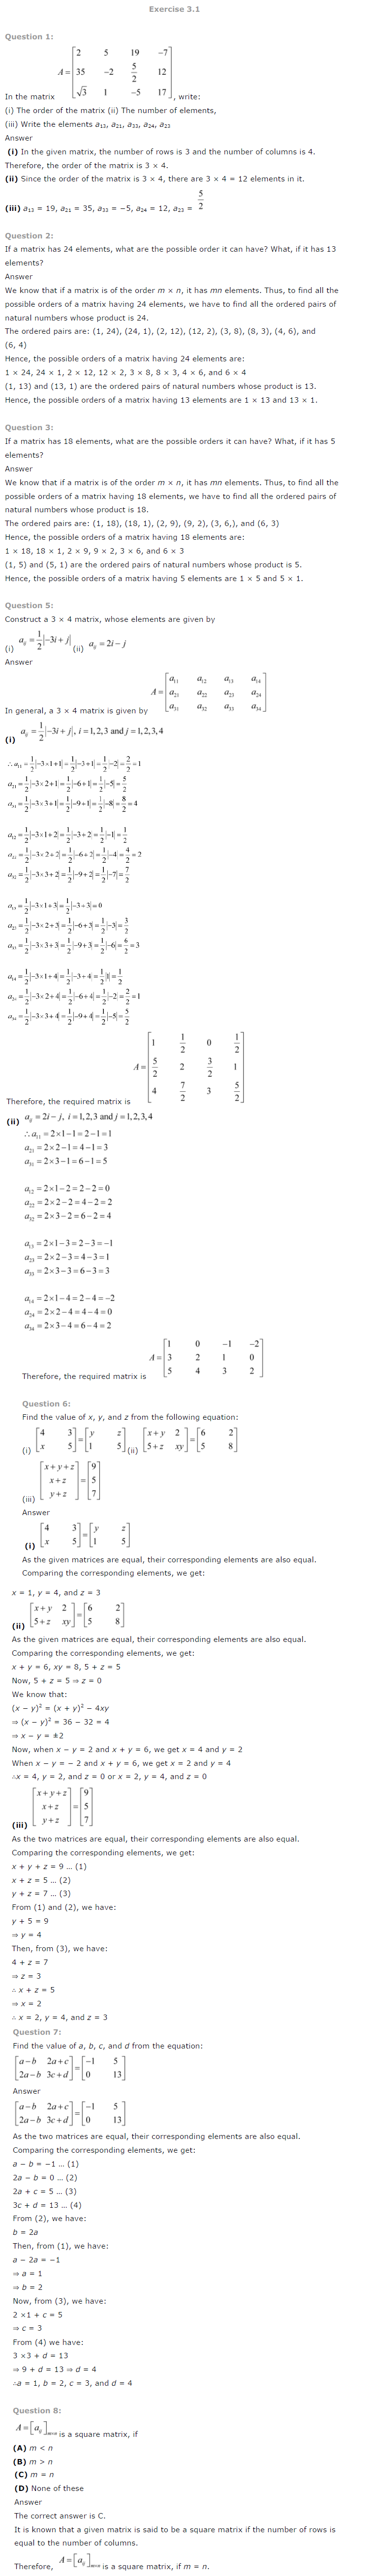 NCERT Solutions for Class 12 Maths Chapter 3 Matrices 2